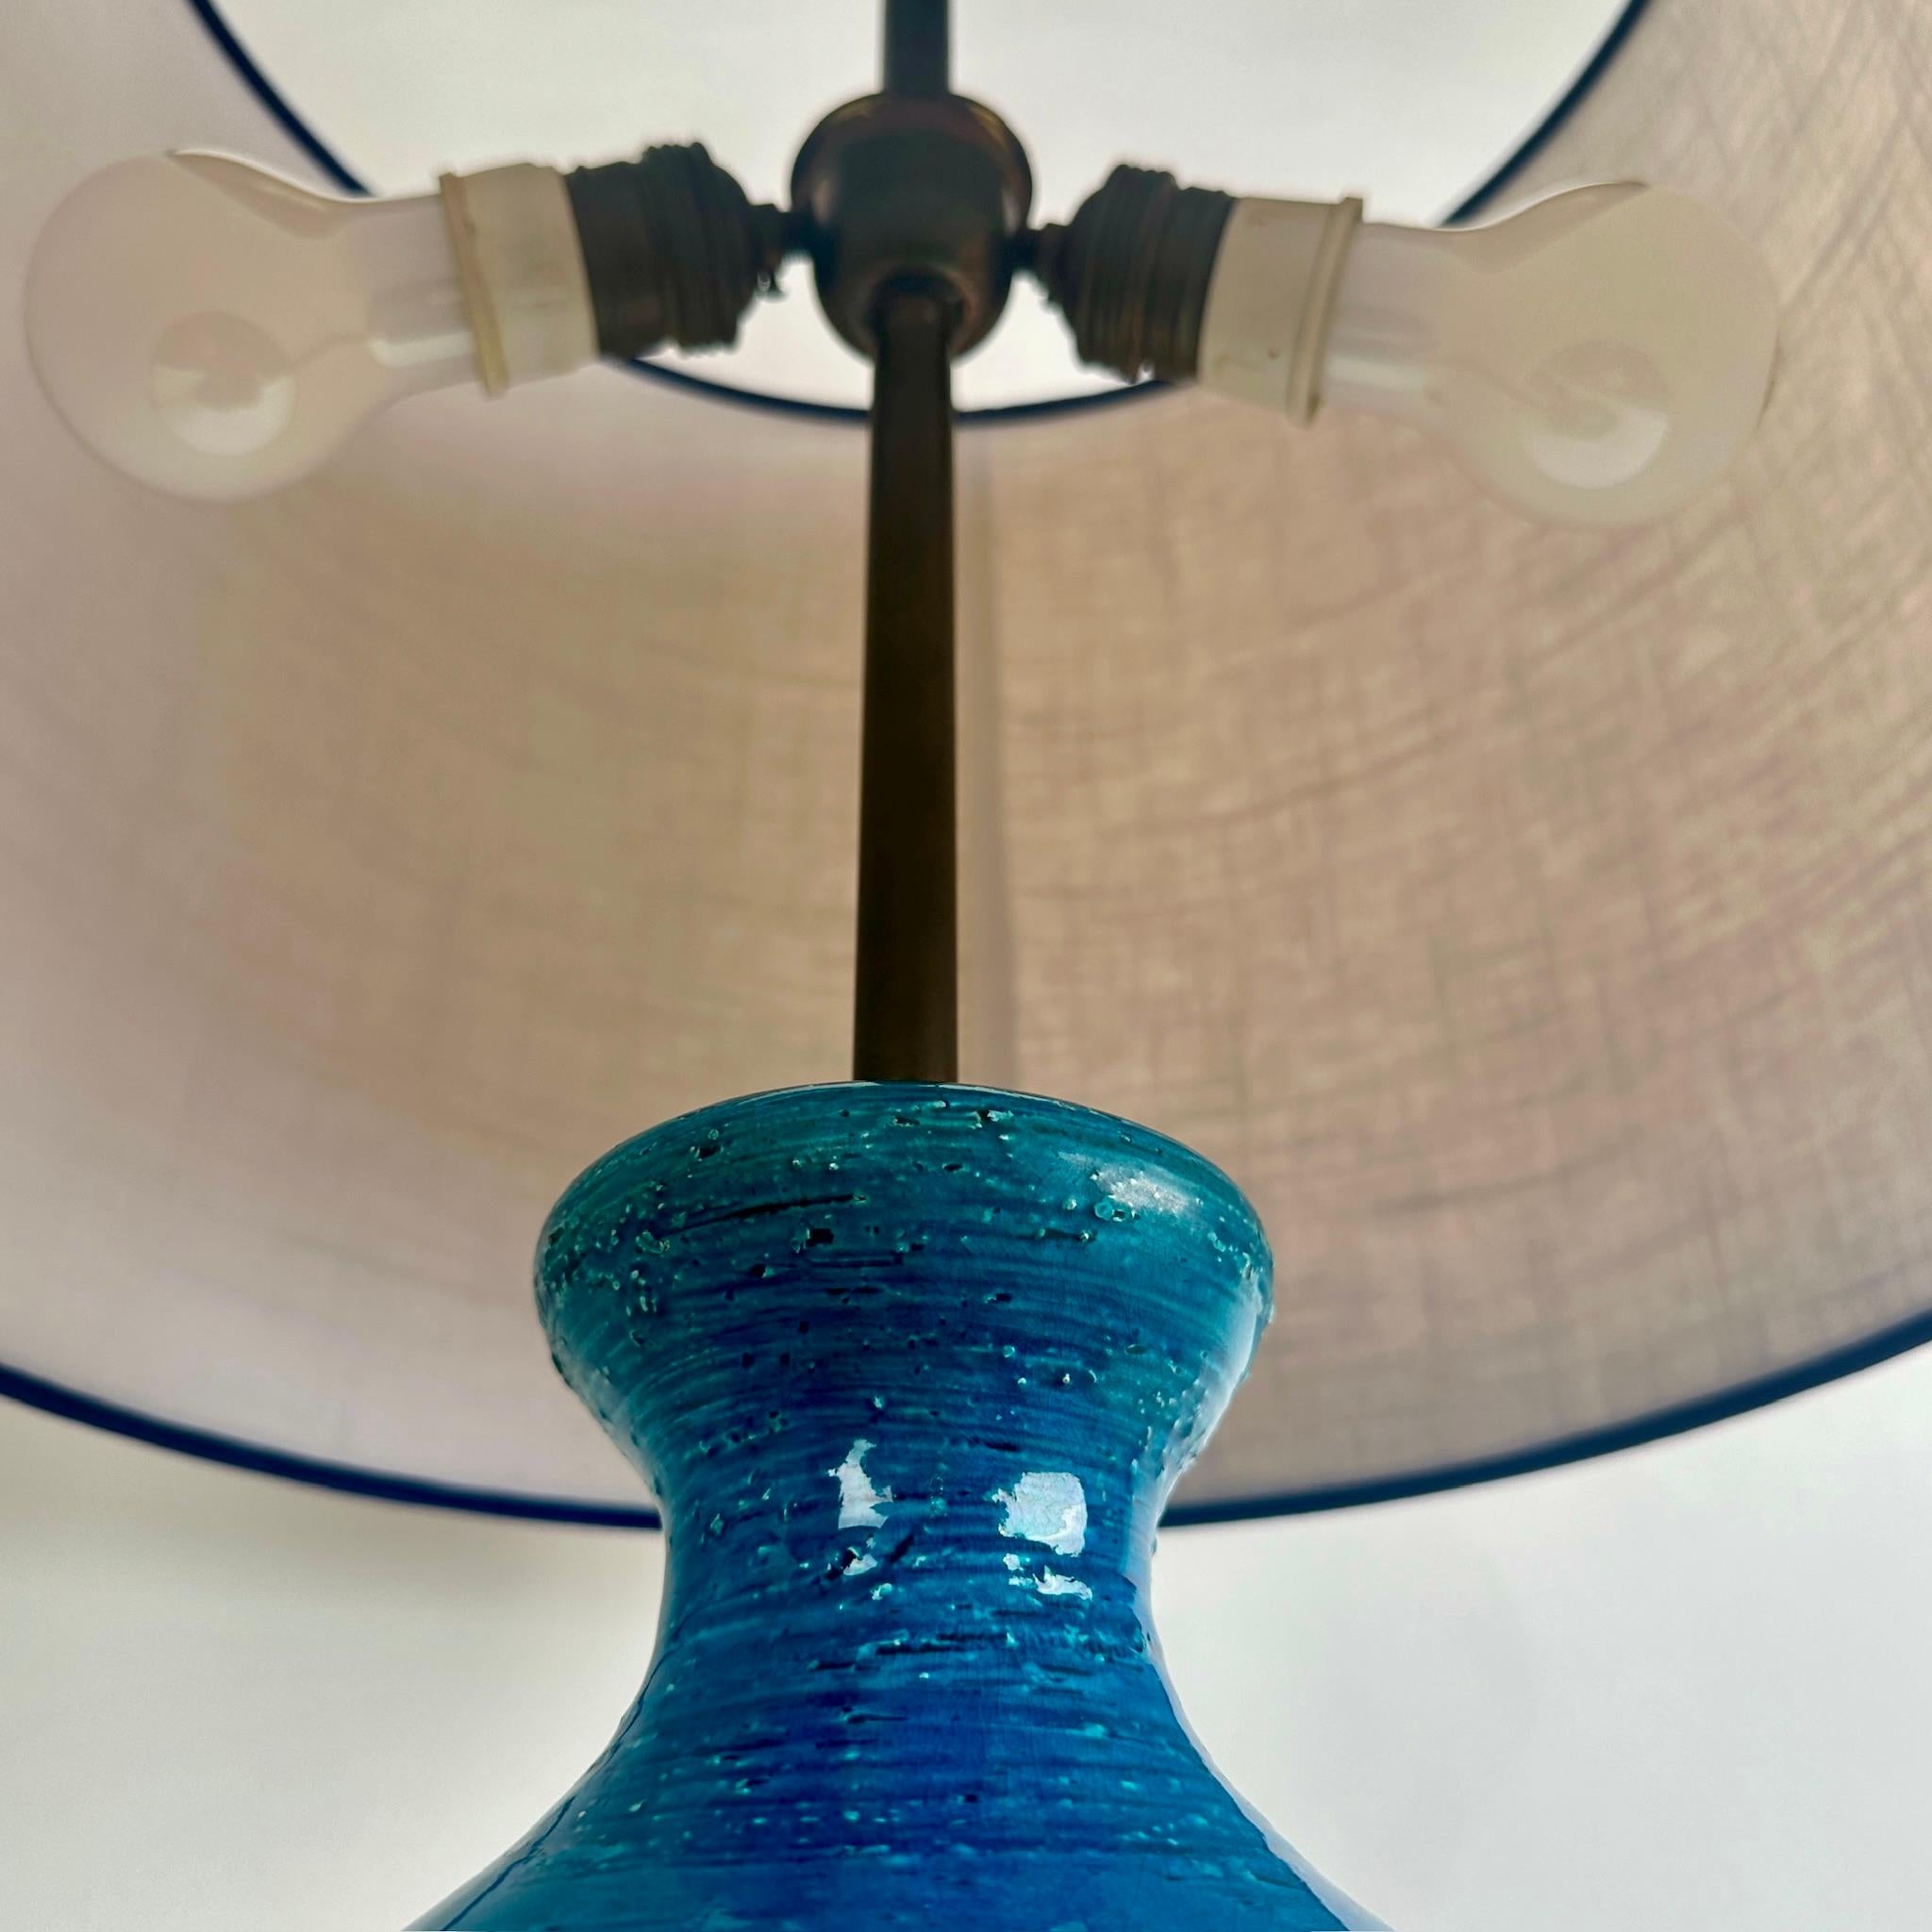 Mid-20th Century Pair of 1950's Rimini Blue Ceramic Table Lamps by Aldo Londi for Bitossi For Sale